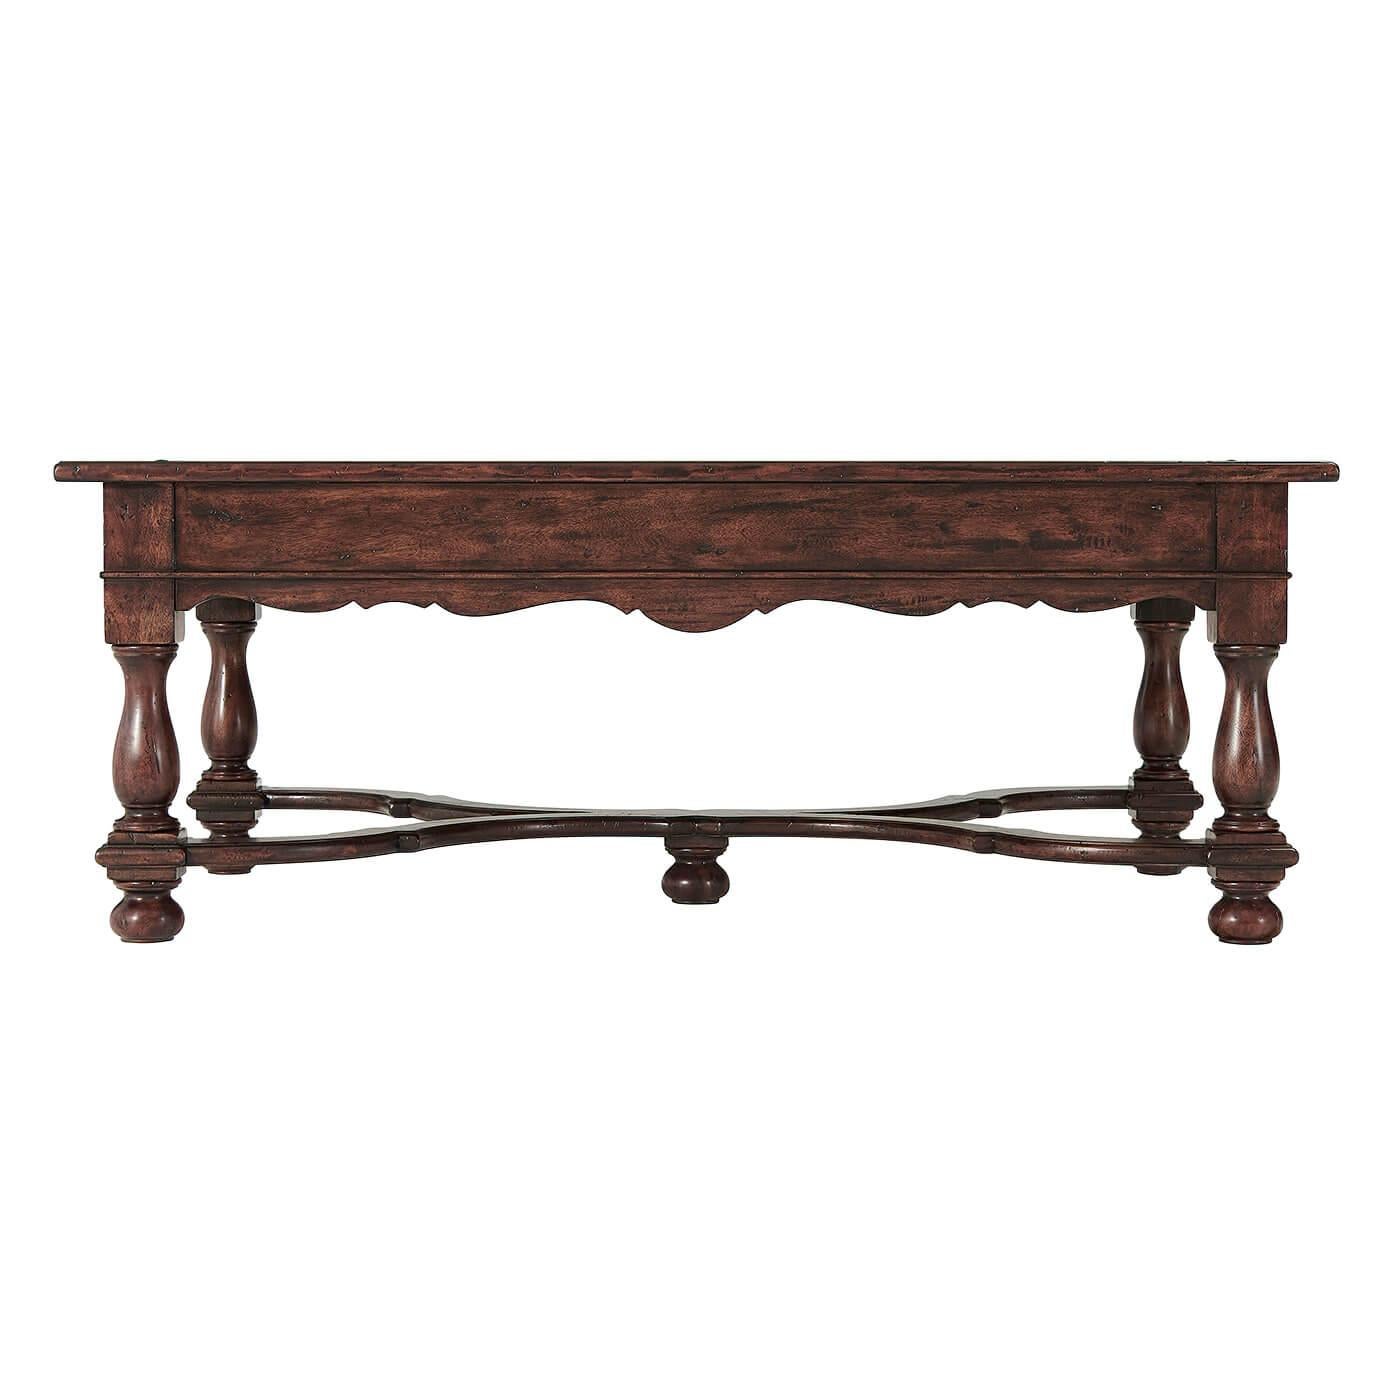 William and Mary Table basse antique William et Mary en vente